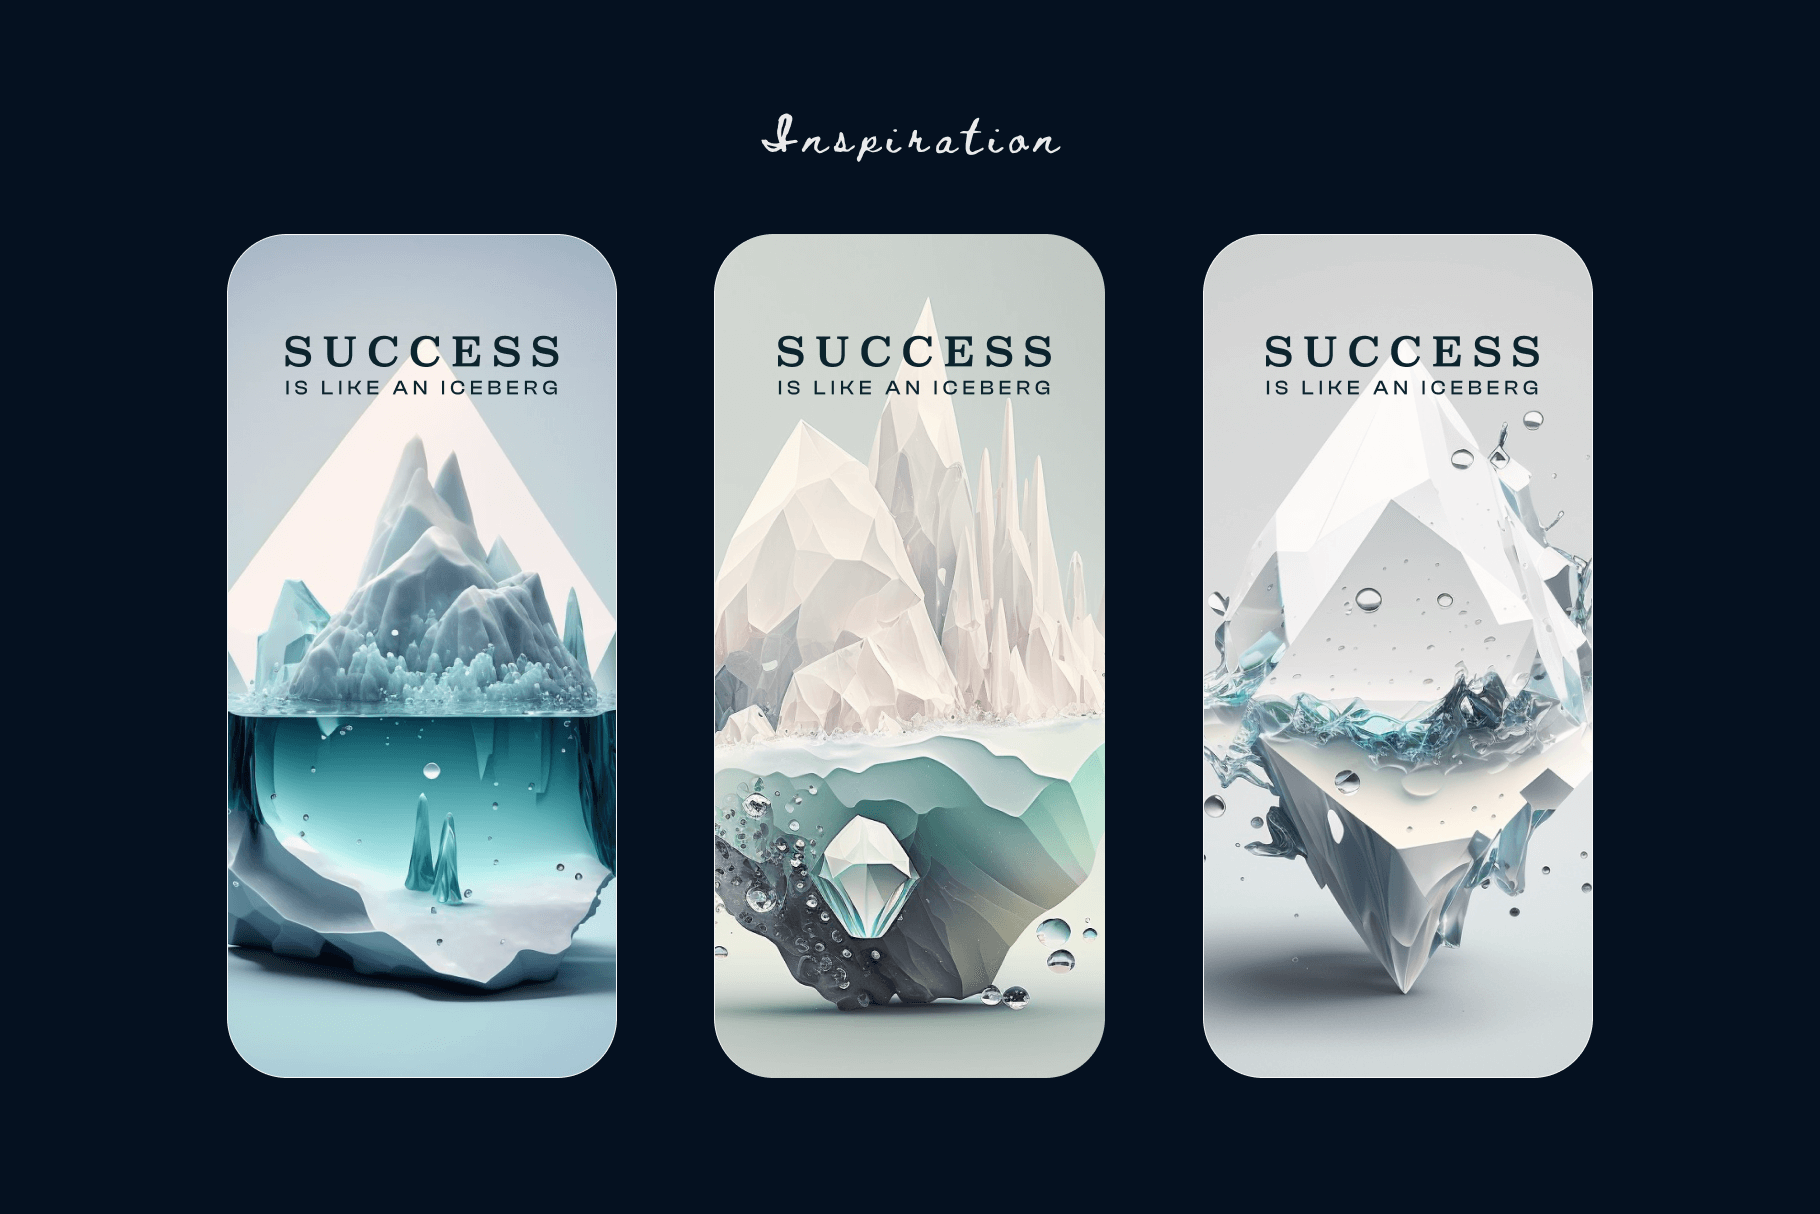 A series of social posts showcasing iceberg images.